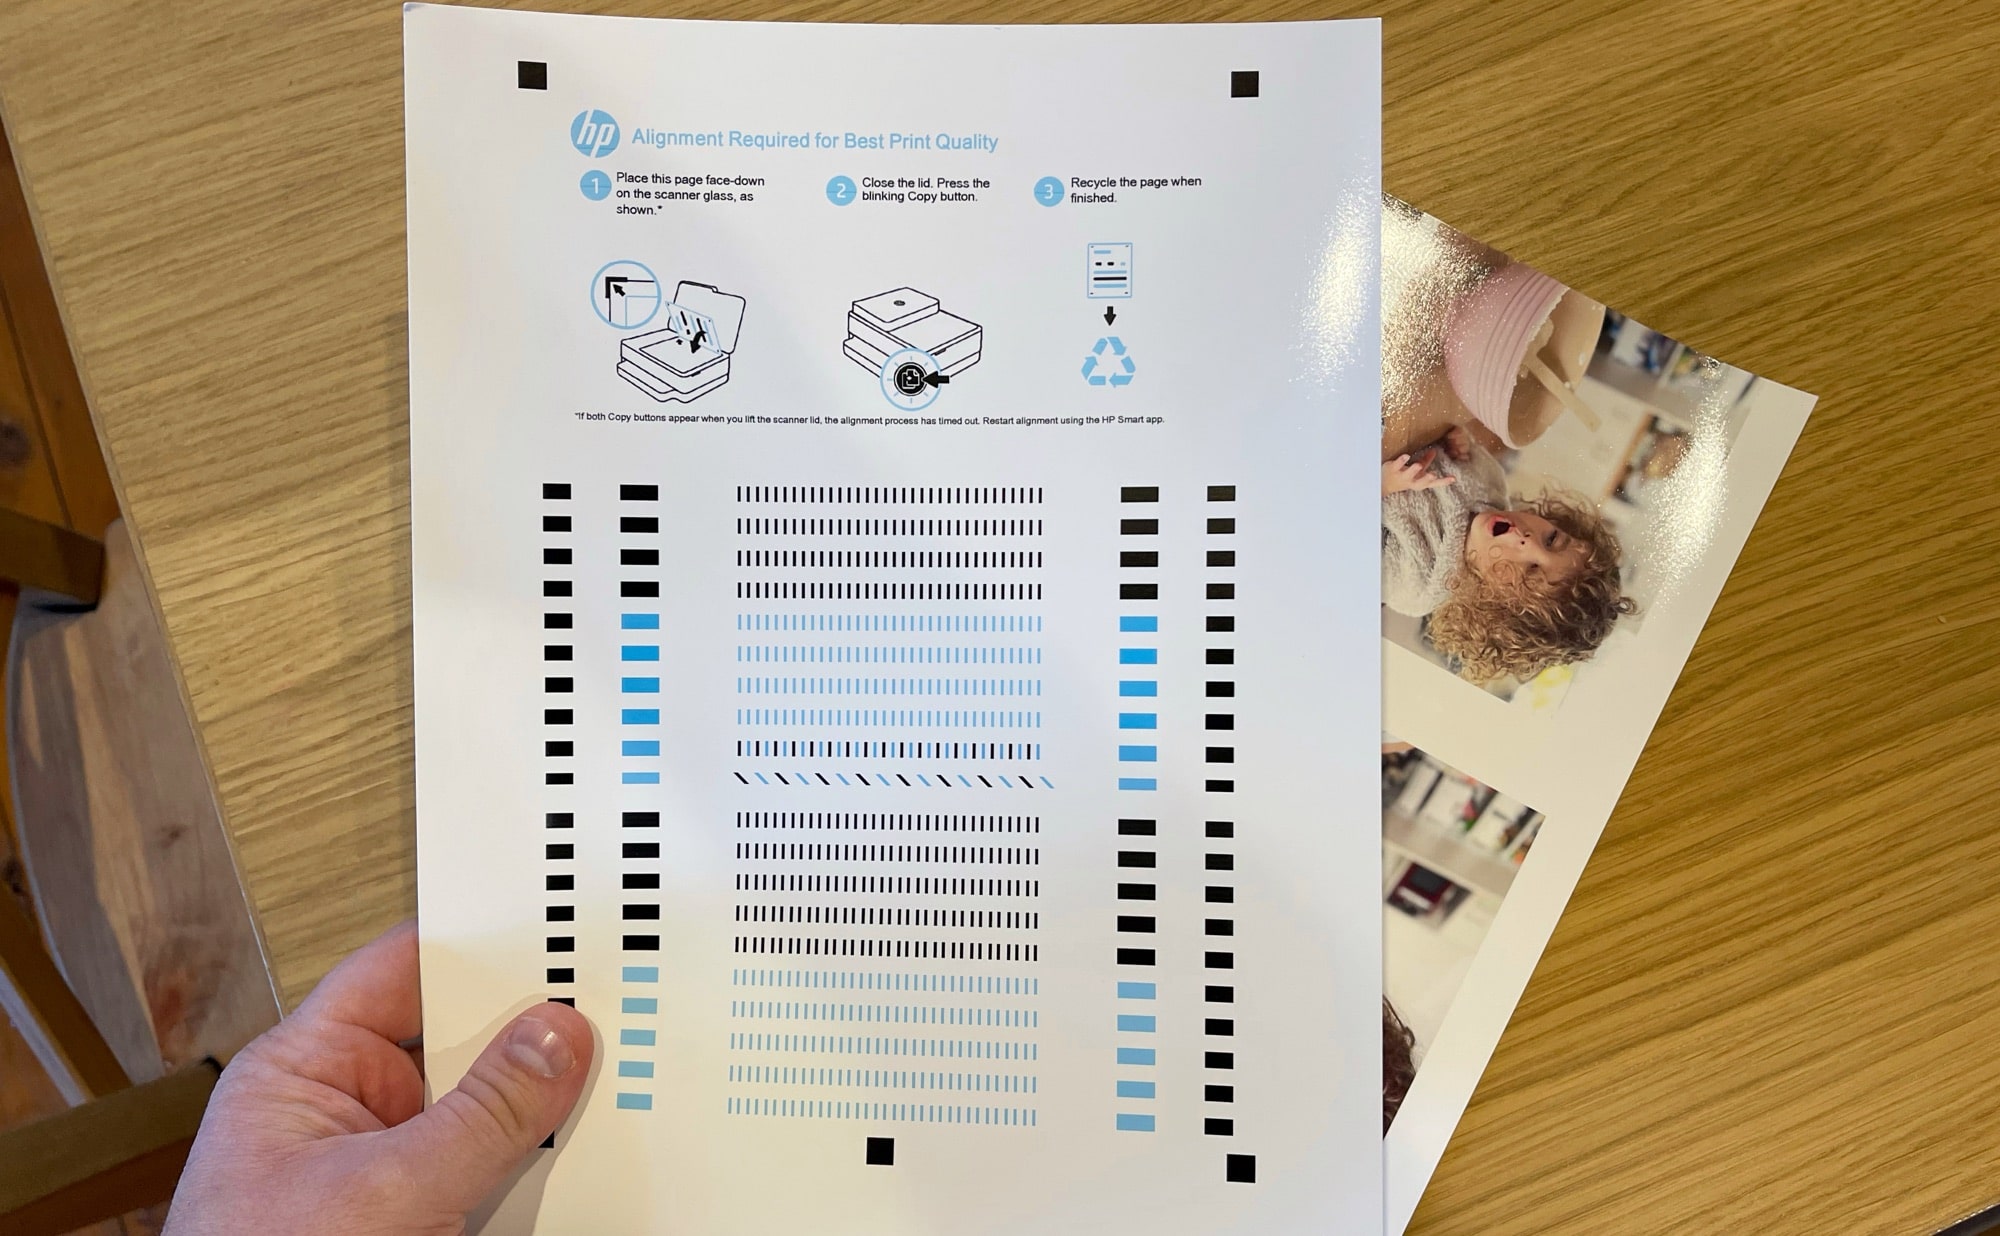 It's so nice HP decided to randomly print an alignment sheet on a sheet of expensive warm tone Harman fibre paper. Thank you, HP. I'm sure this will count against my bandwidth, and it's a waste of good paper, too.